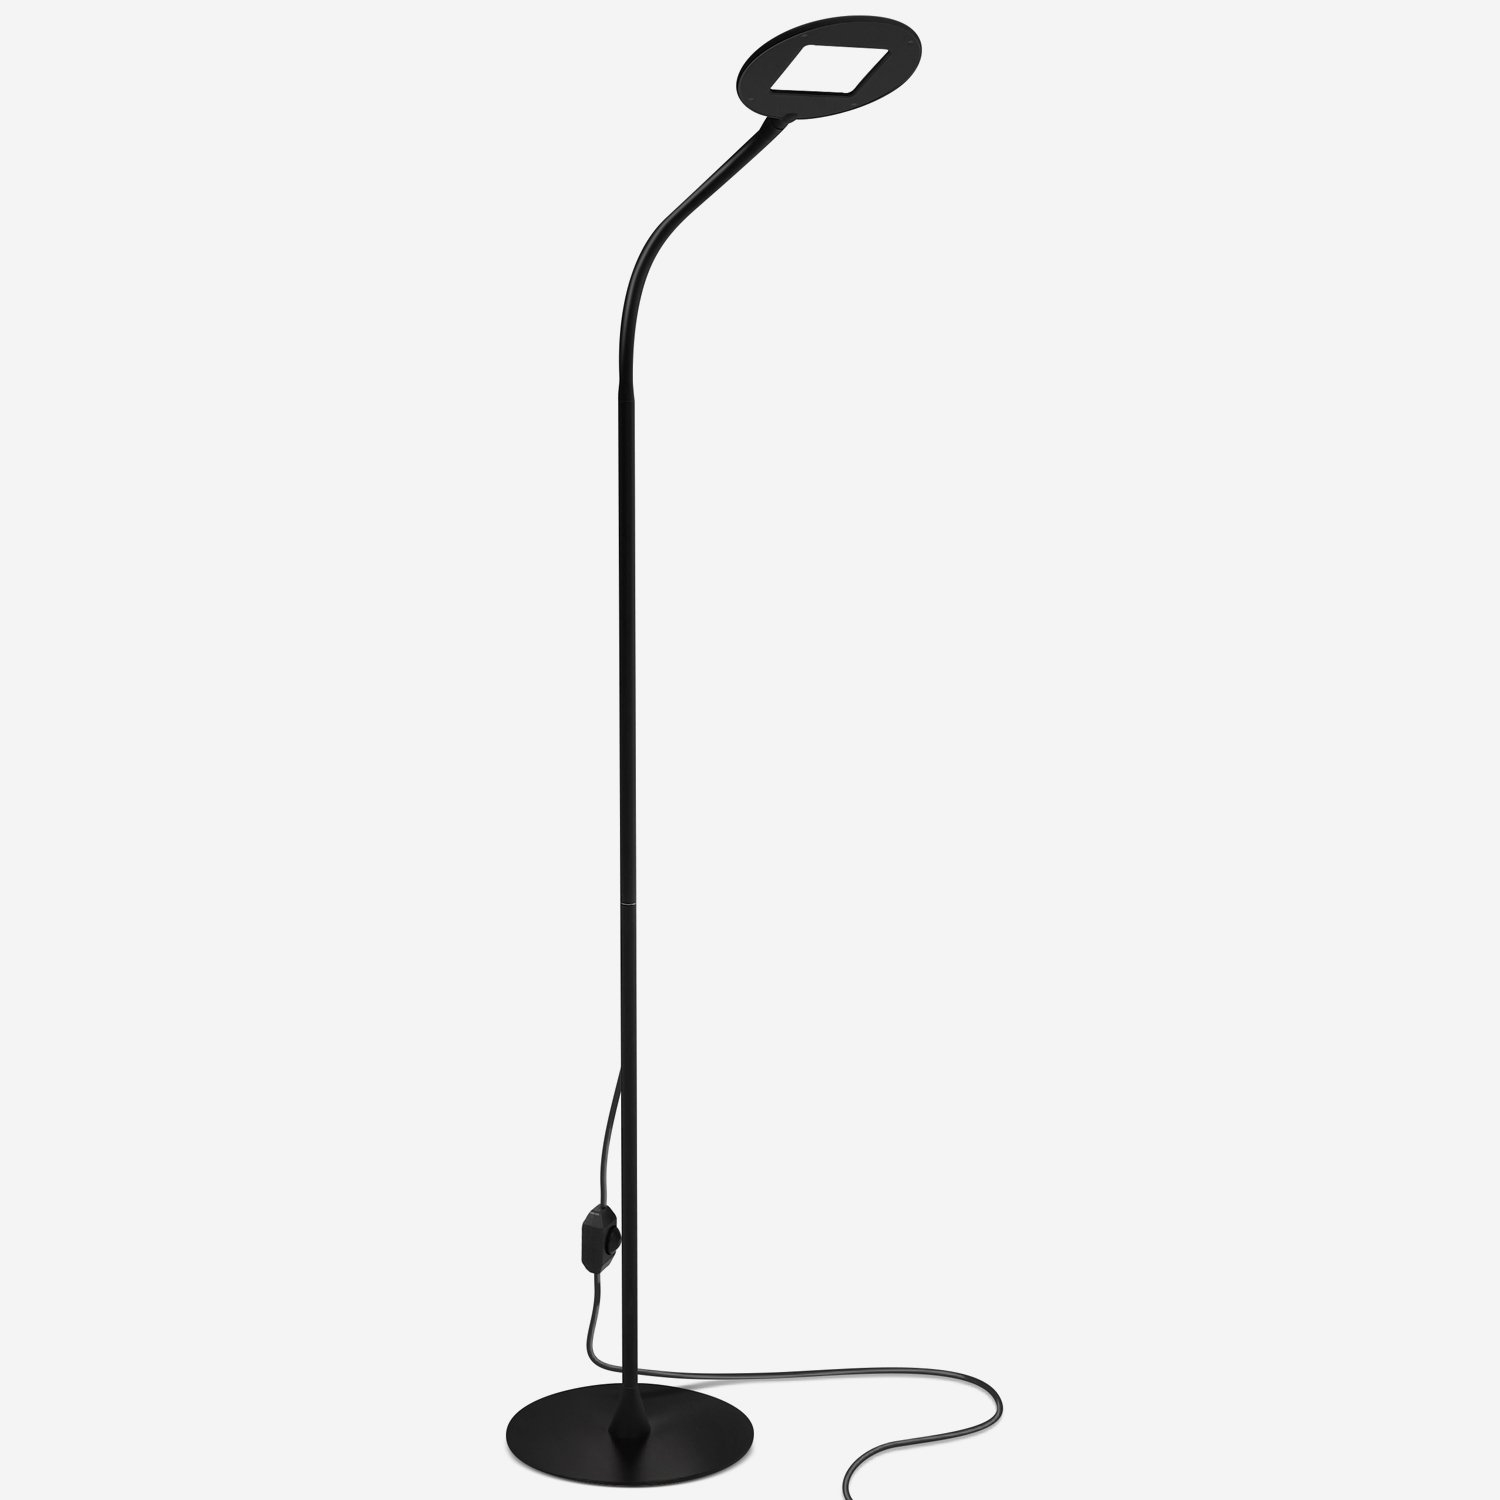 Contour Flex Led Floor Lamp For Reading Crafts Office Tasks with regard to size 1500 X 1500